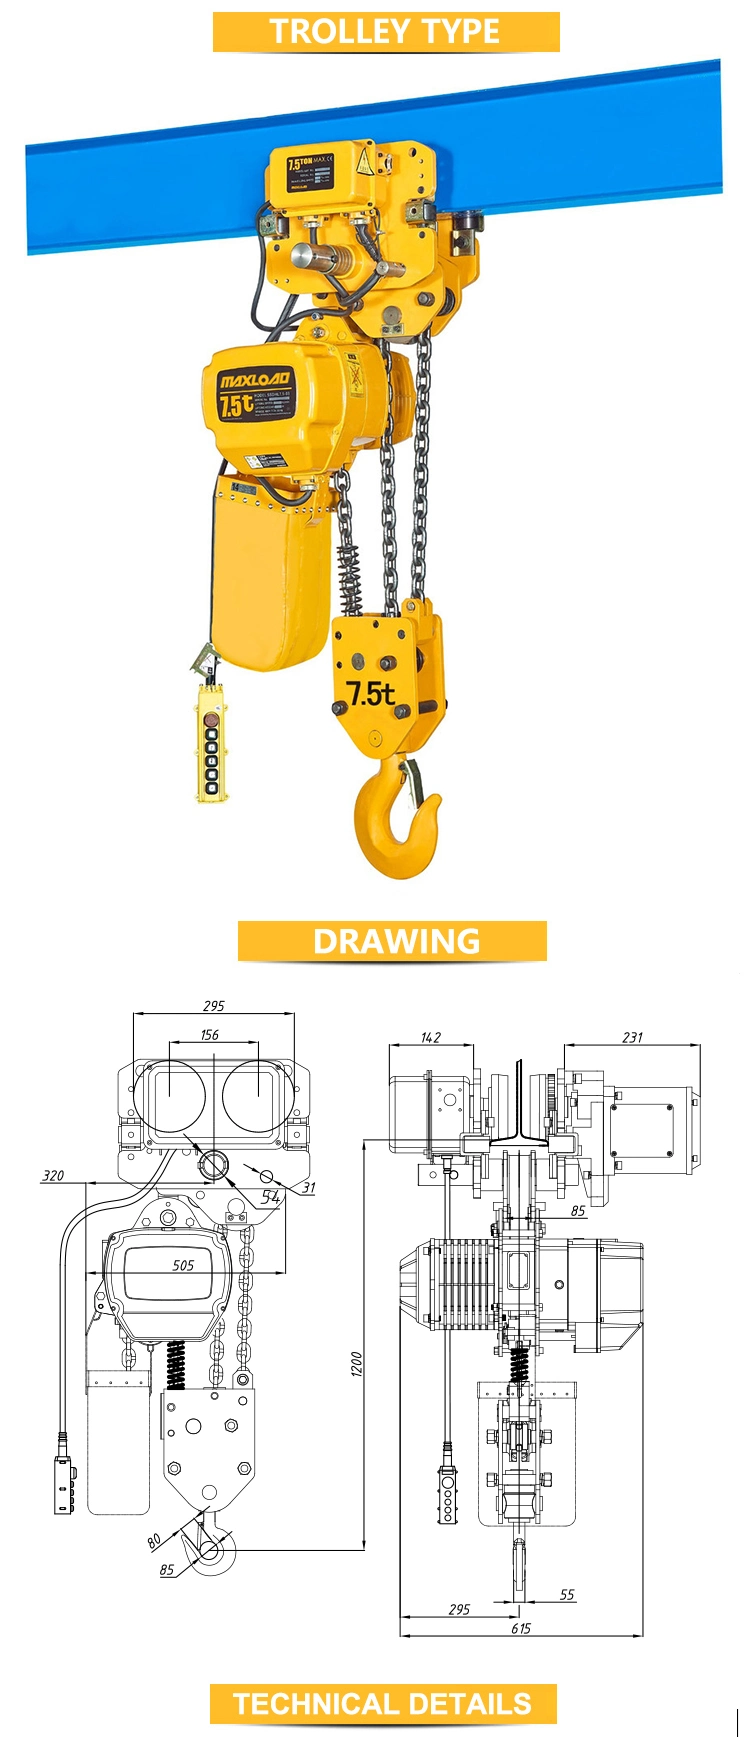 Factory Price Lifting Hoists 7.5 Ton Electric Chain Hoist (electric trolley type)